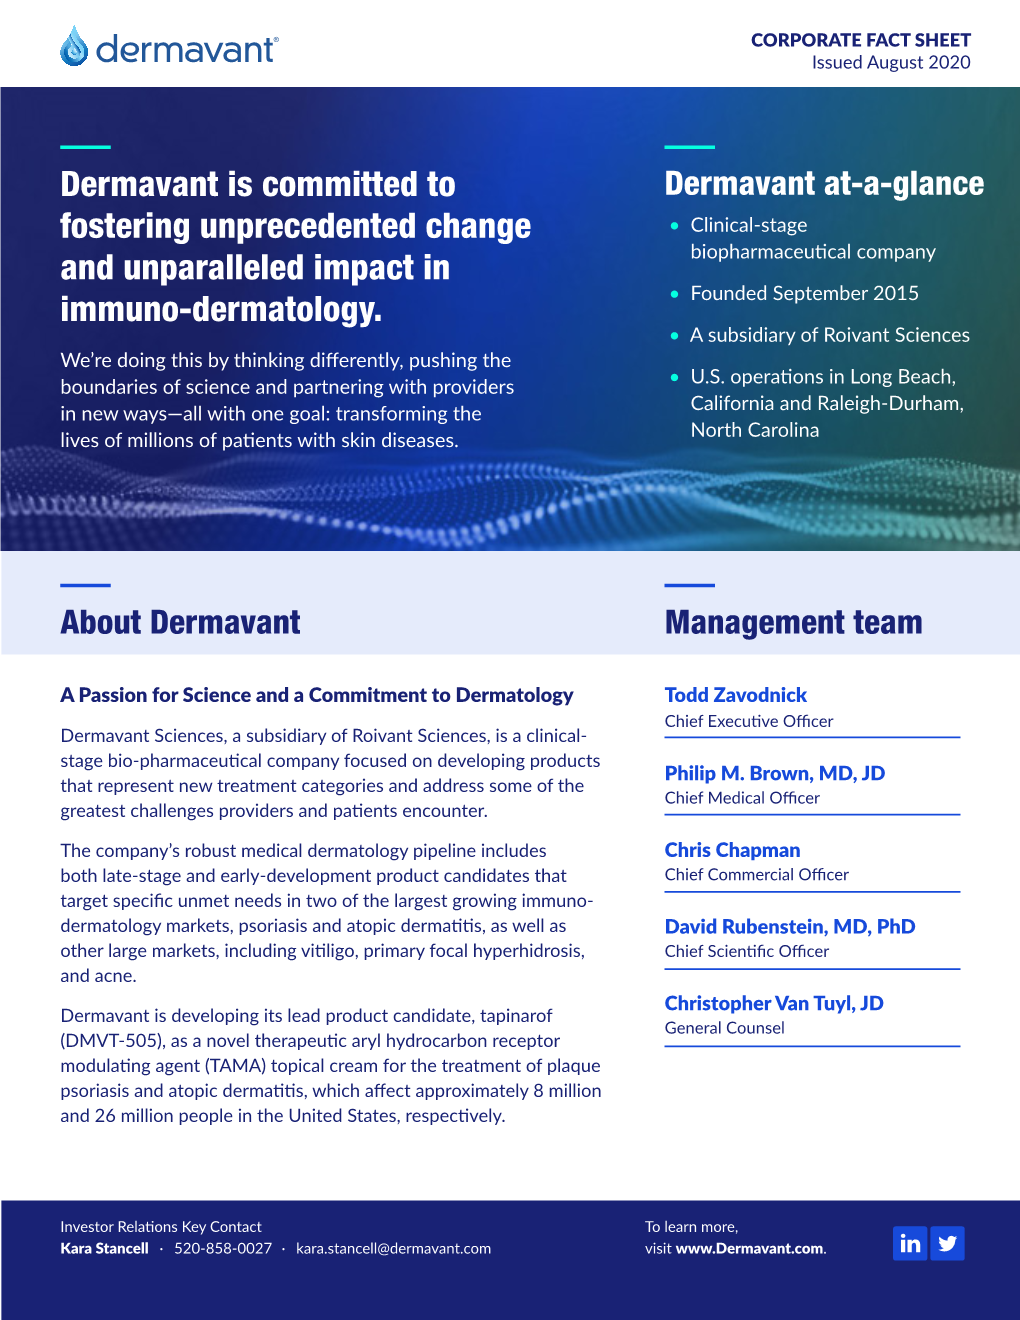 Dermavant Is Committed to Fostering Unprecedented Change And